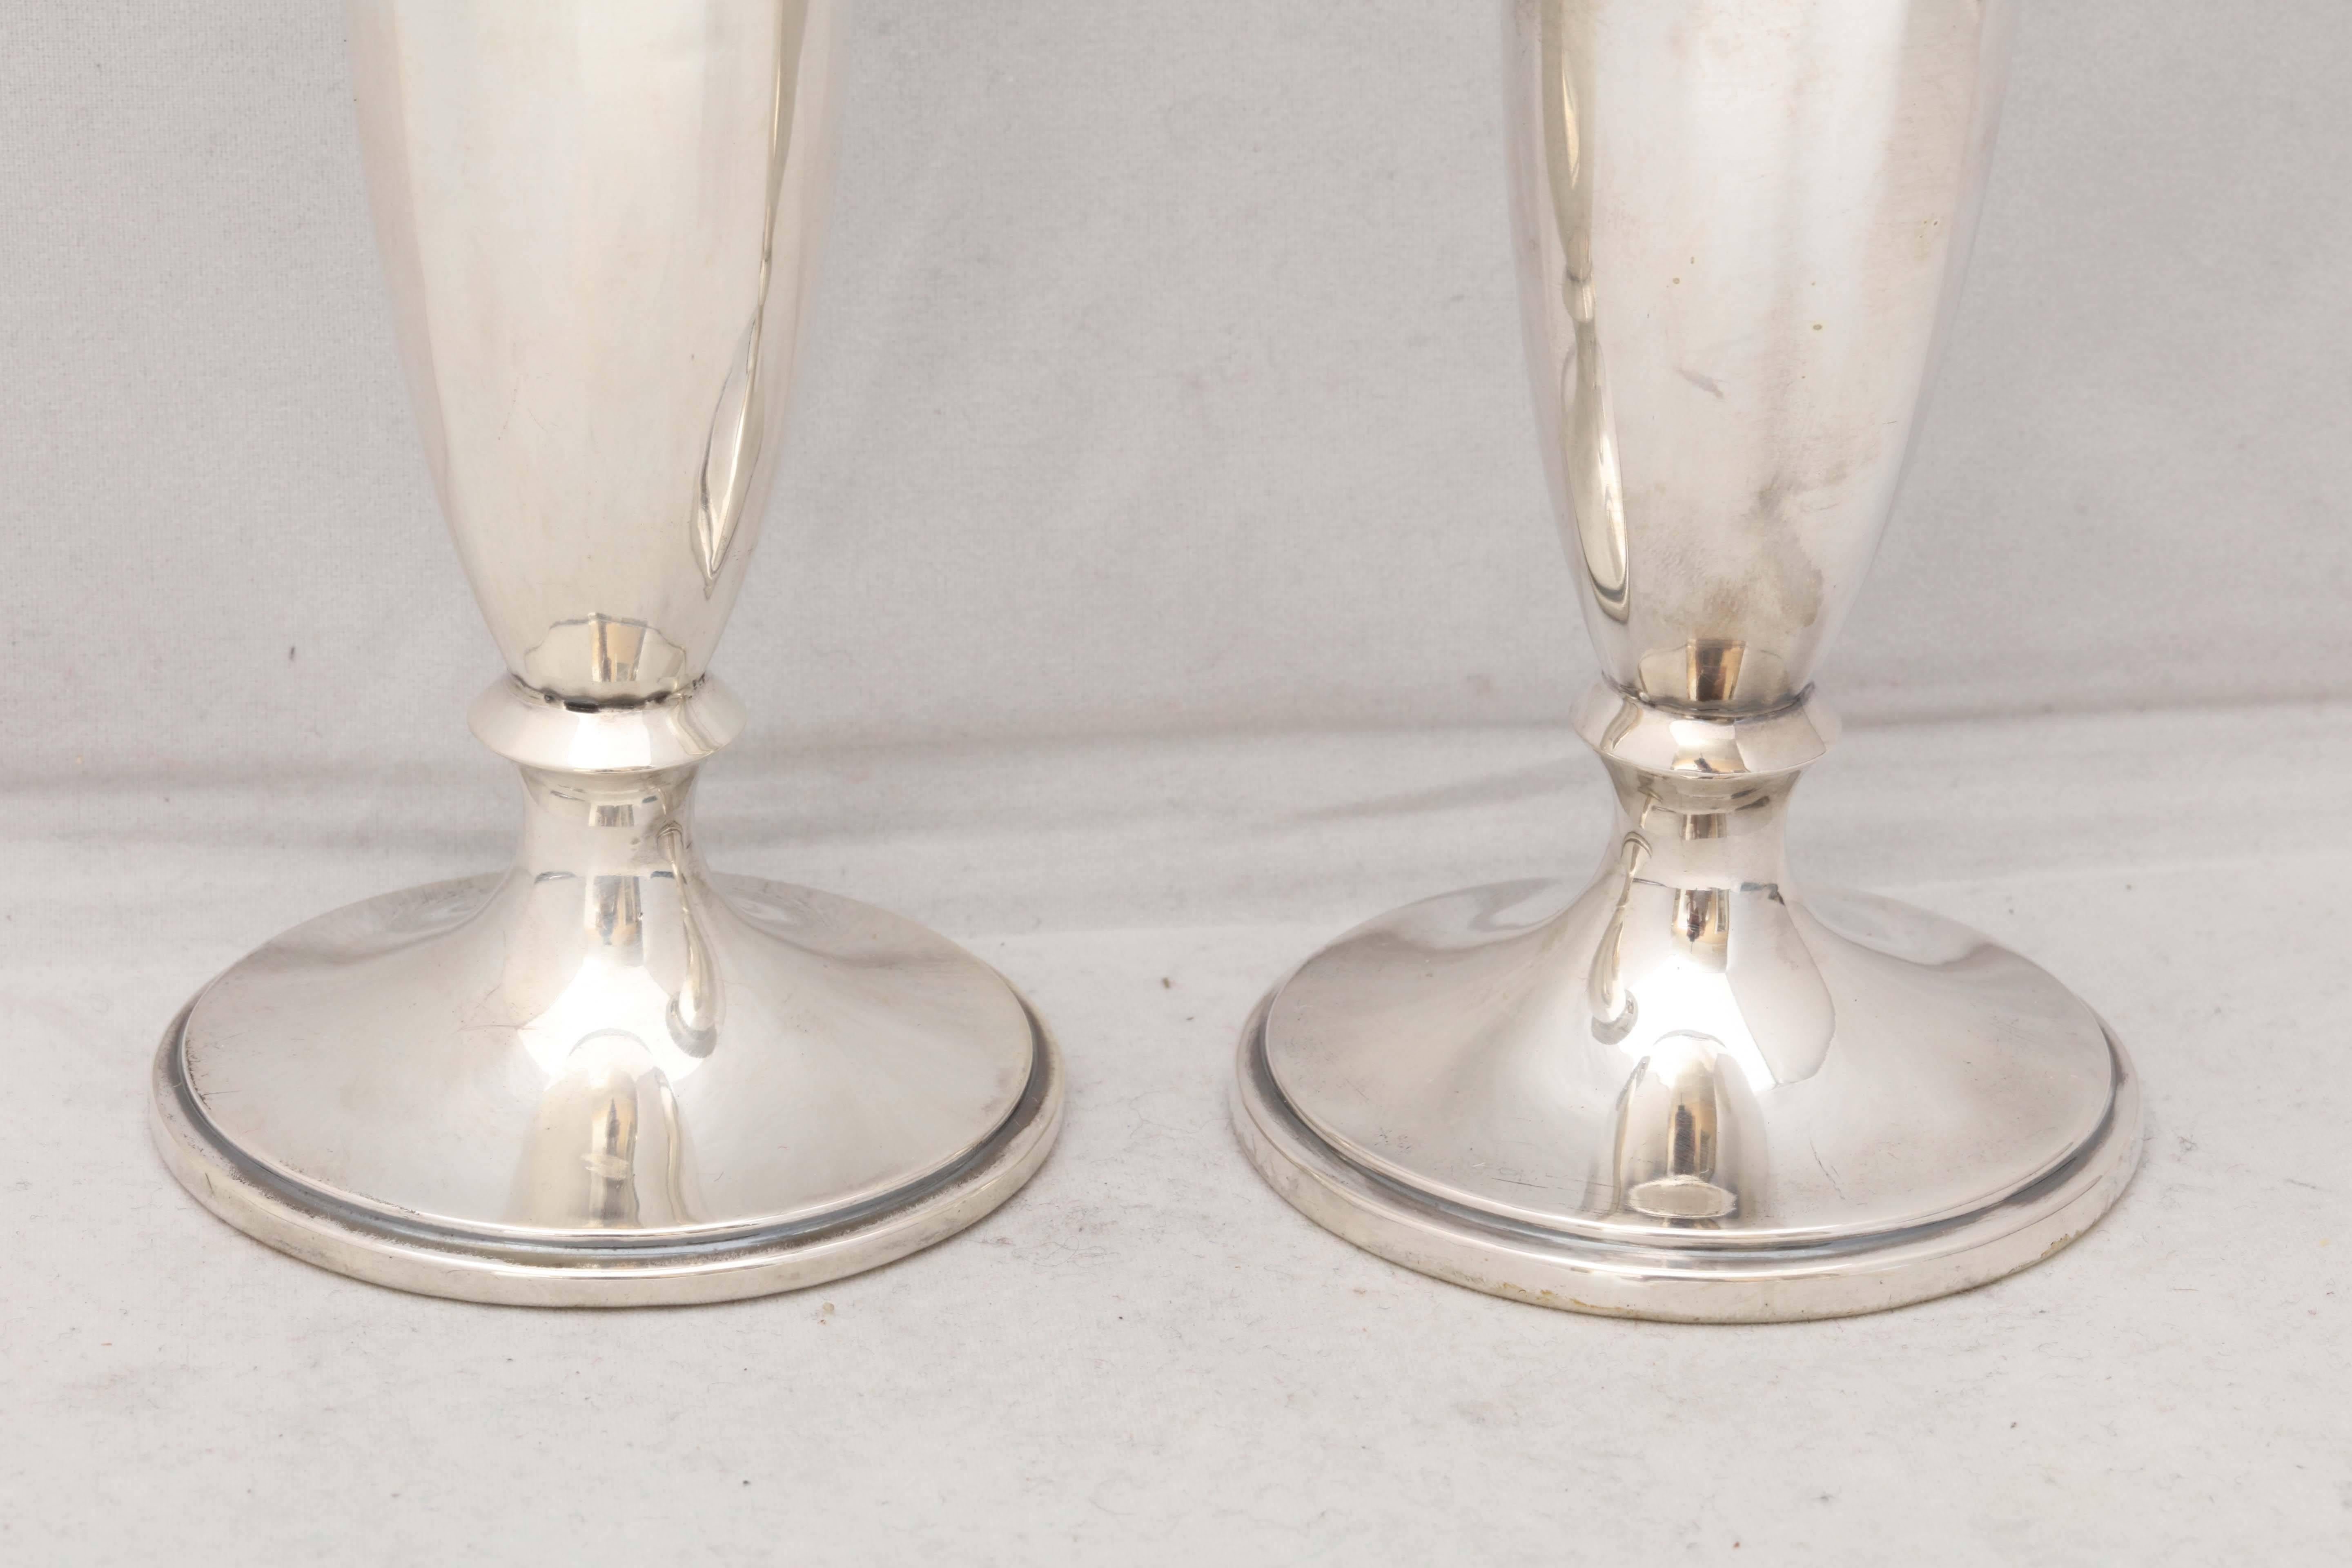 English Pair of Edwardian Sterling Silver Vases